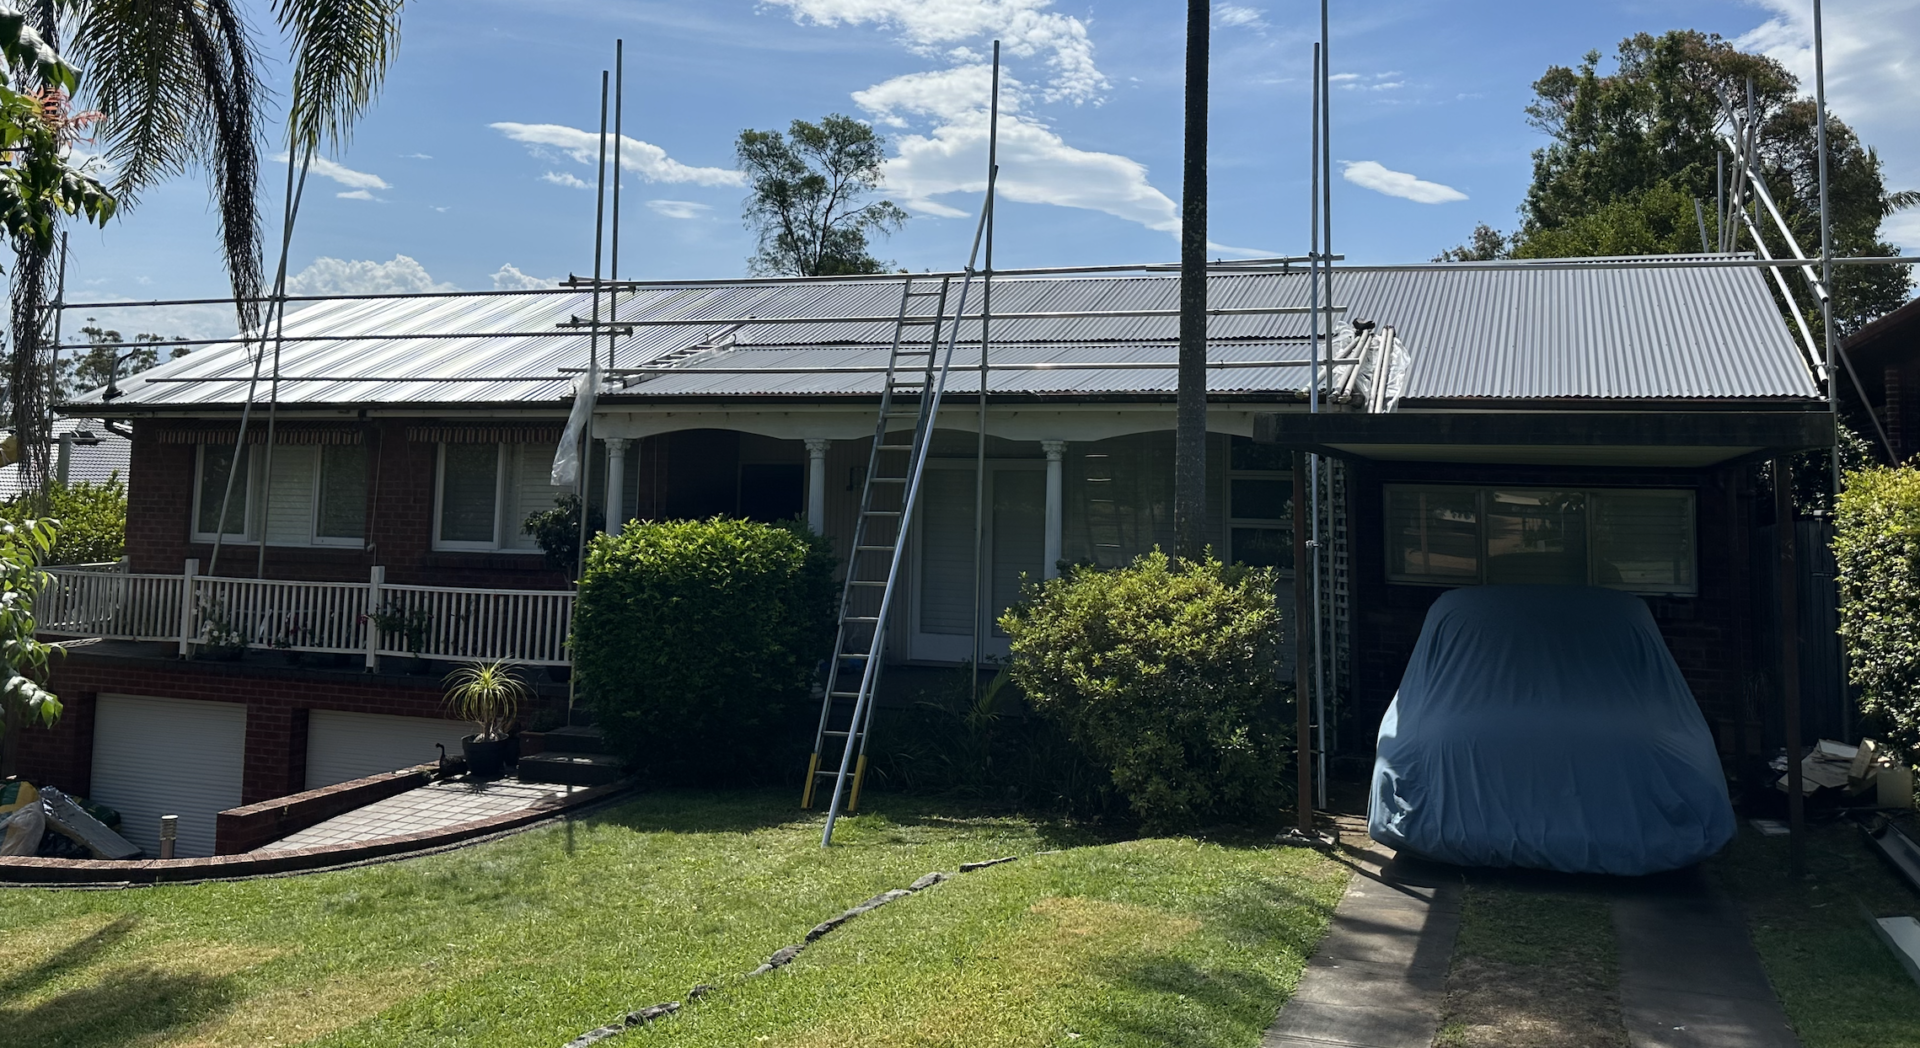 West Pymble Metal Roofing